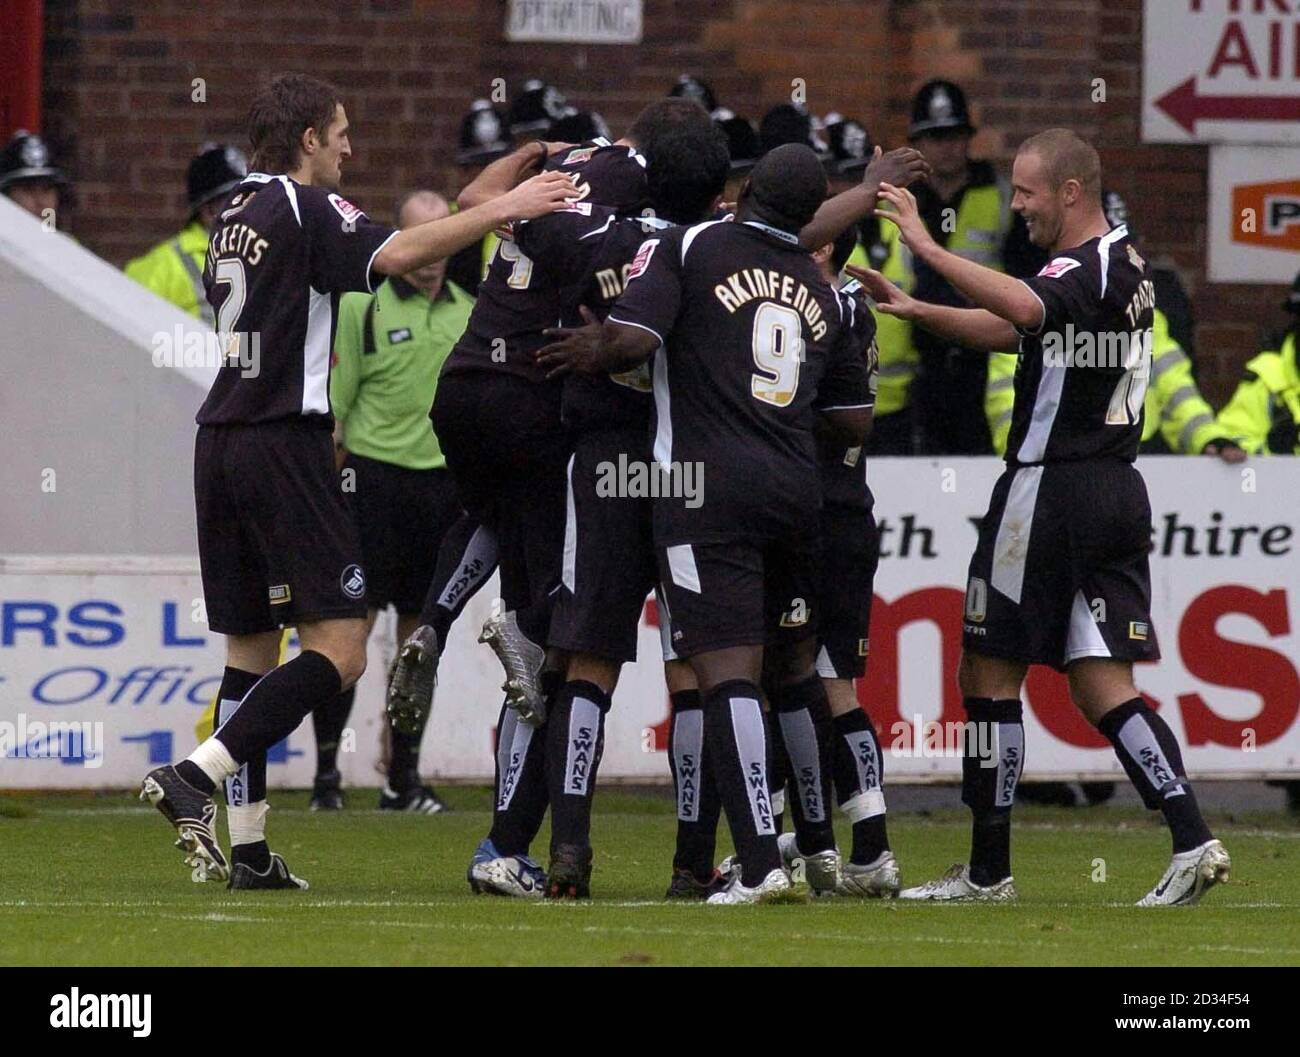 Swansea's Marcus Bean (hidden) celebrates scoring with team mates during the Coca Cola League One match against Rotherham at Millmoor Ground, Rotherham, Saturday October 22, 2005. Rotherham drew 2-2 with Swansea. PRESS ASSOCIATION Photo. Photo credit should read: PA. THIS PICTURE CAN ONLY BE USED WITHIN THE CONTEXT OF AN EDITORIAL FEATURE. NO UNOFFICIAL CLUB WEBSITE USE. Stock Photo